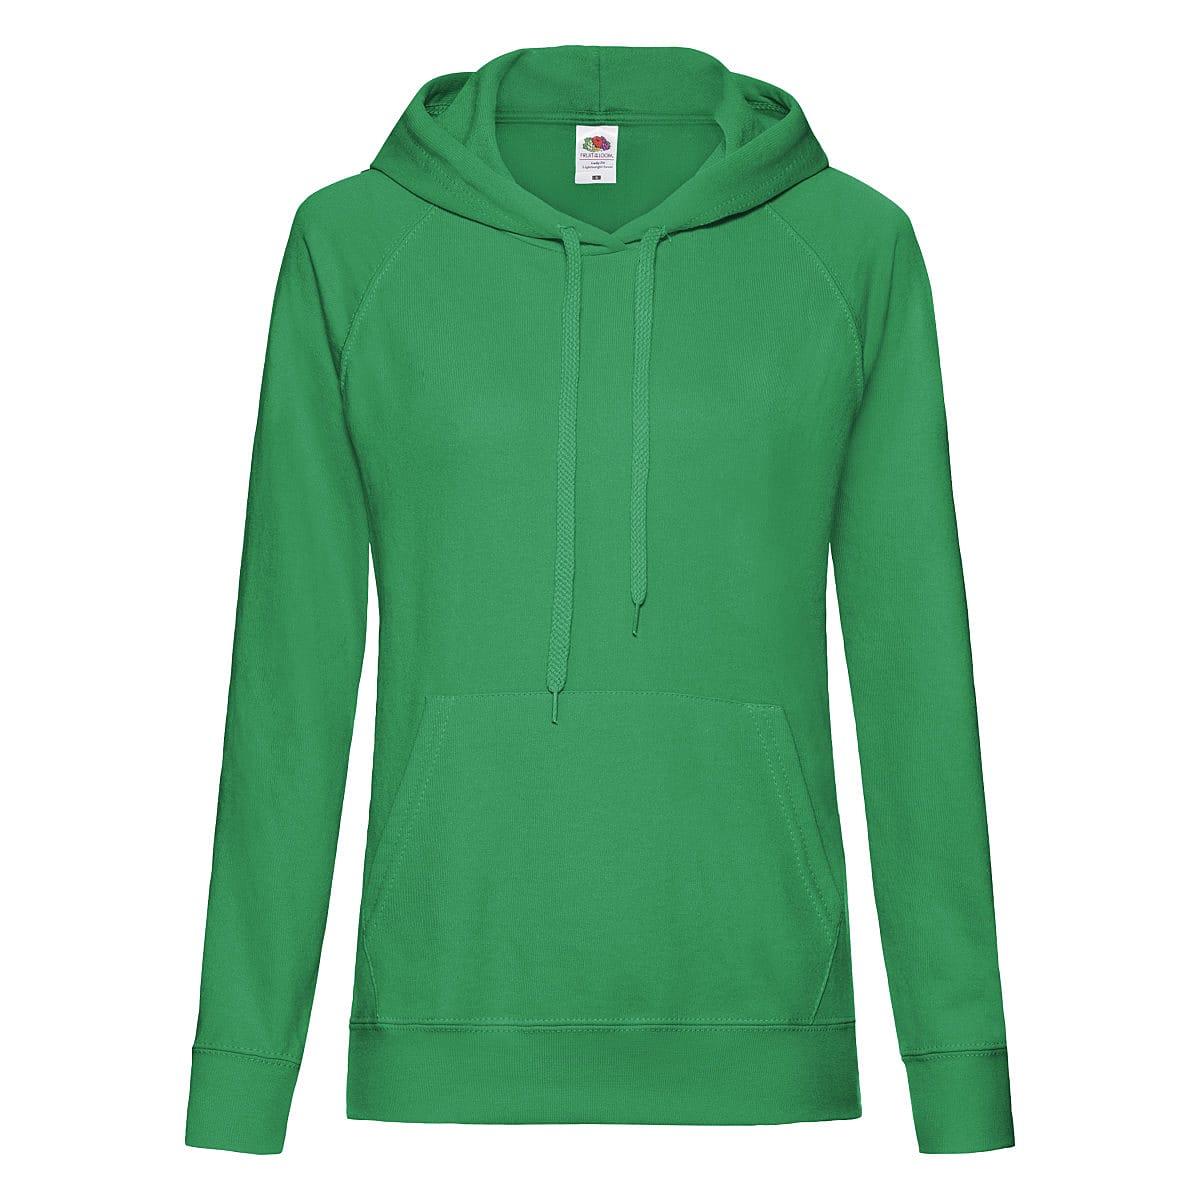 Fruit Of The Loom Lady-Fit Lightweight Hoodie in Kelly Green (Product Code: 62148)